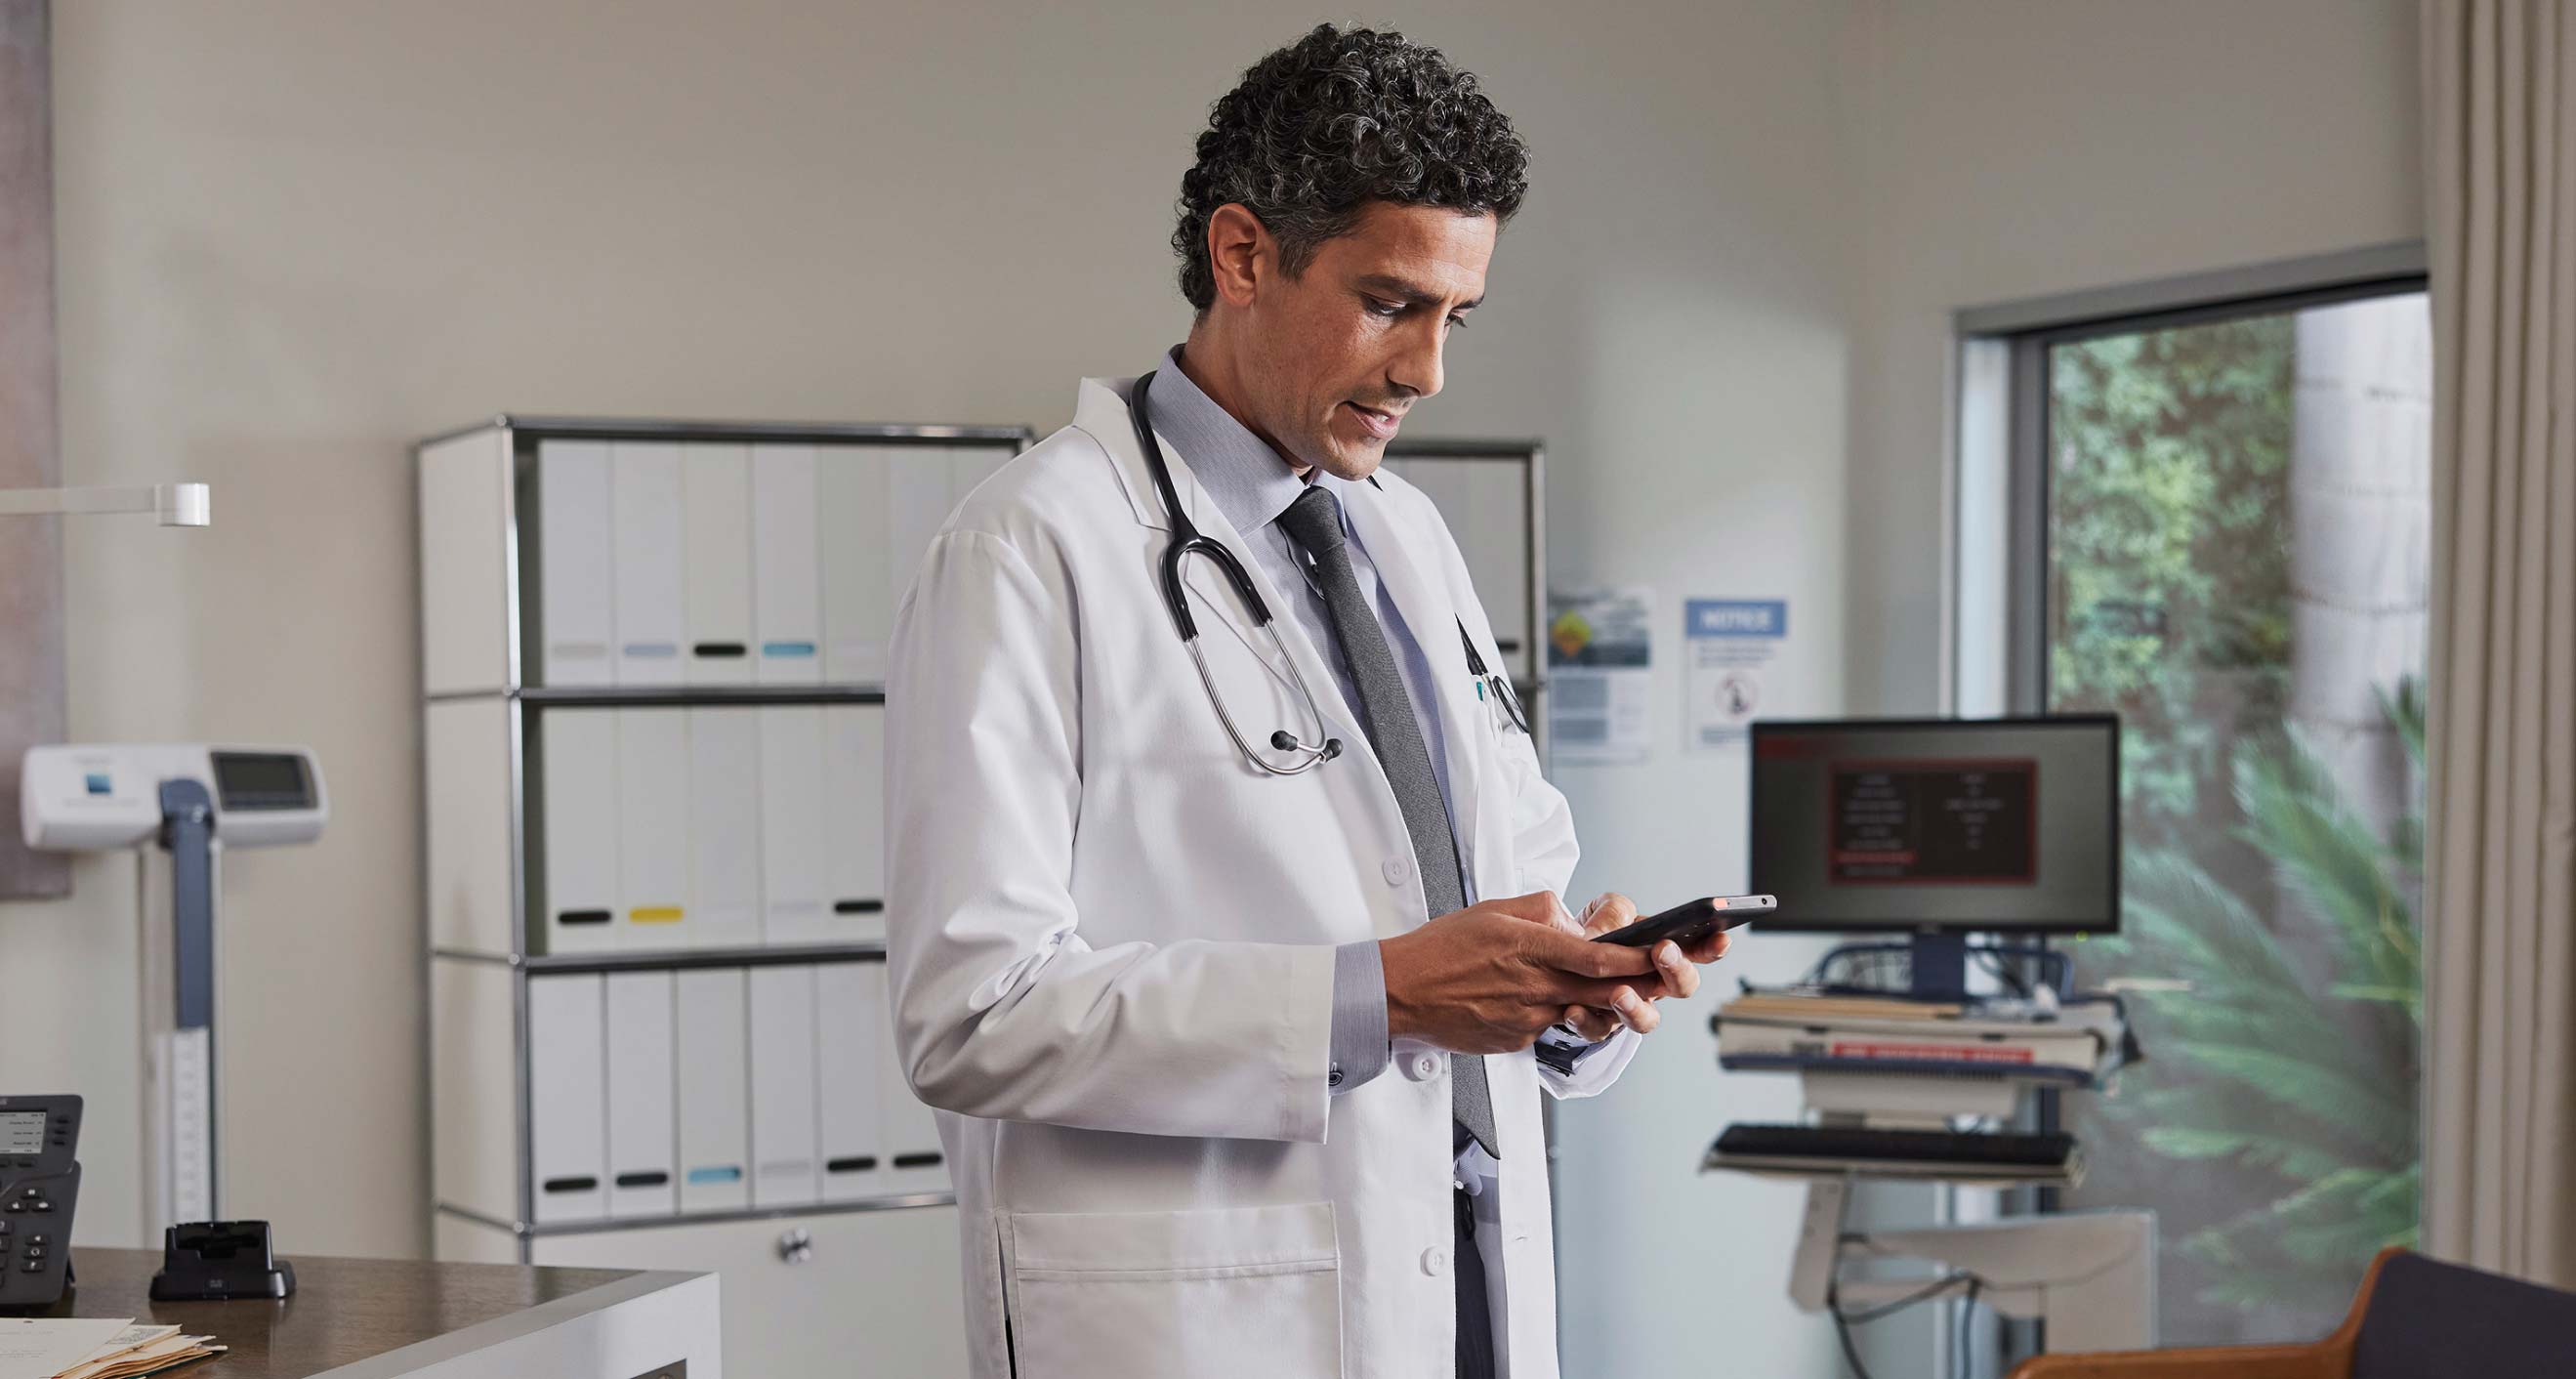 A doctor uses Webex to manage patient care